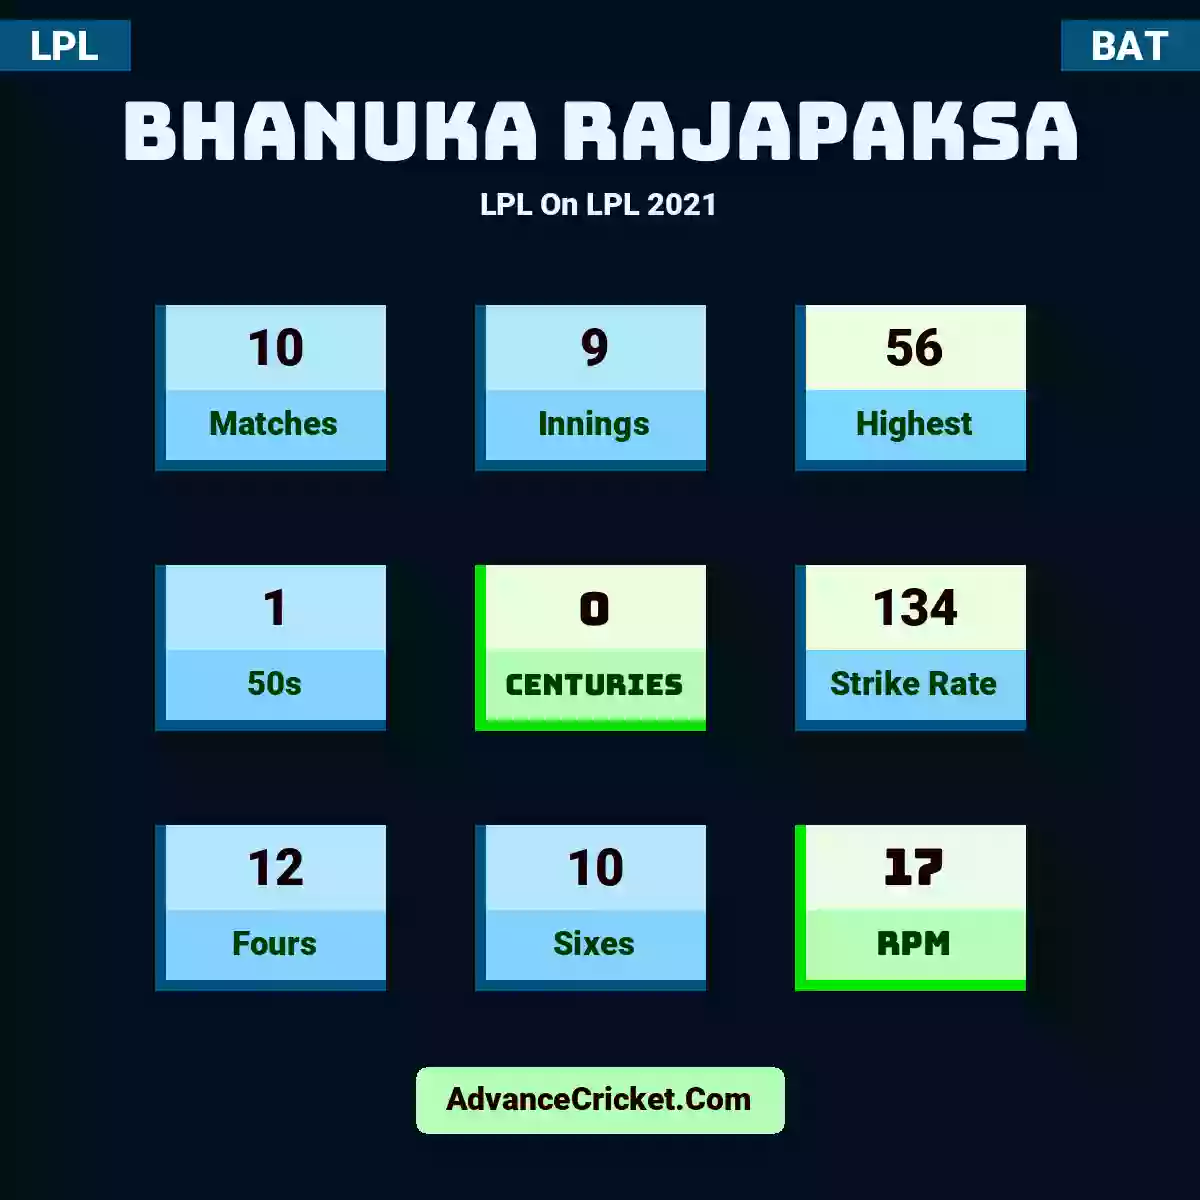 Bhanuka Rajapaksa LPL  On LPL 2021, Bhanuka Rajapaksa played 10 matches, scored 56 runs as highest, 1 half-centuries, and 0 centuries, with a strike rate of 134. B.Rajapaksa hit 12 fours and 10 sixes, with an RPM of 17.